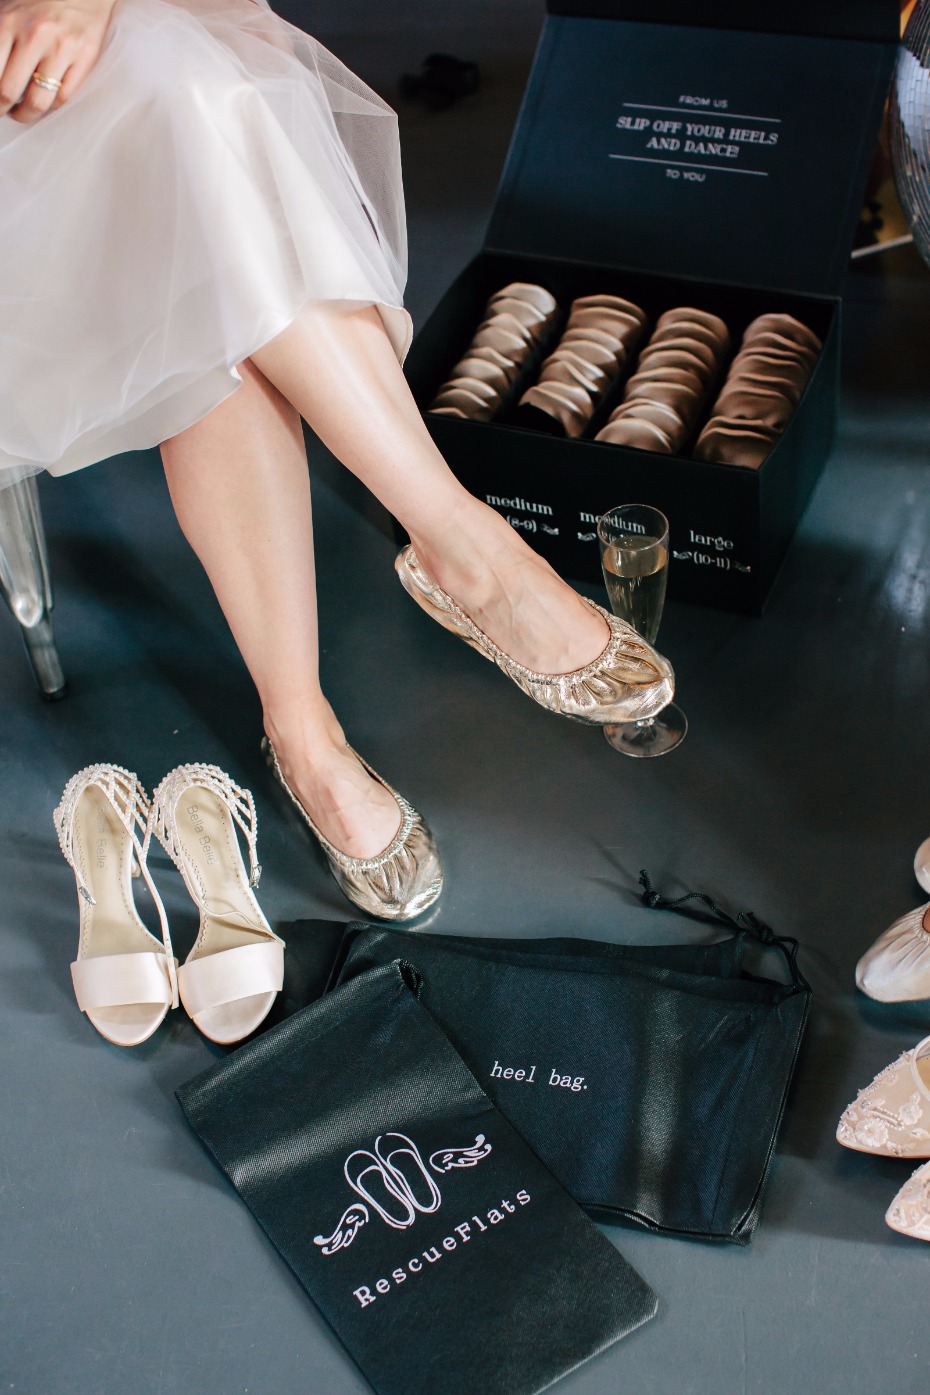 Rescue Flats will rescue your wedding guests feet and save the party